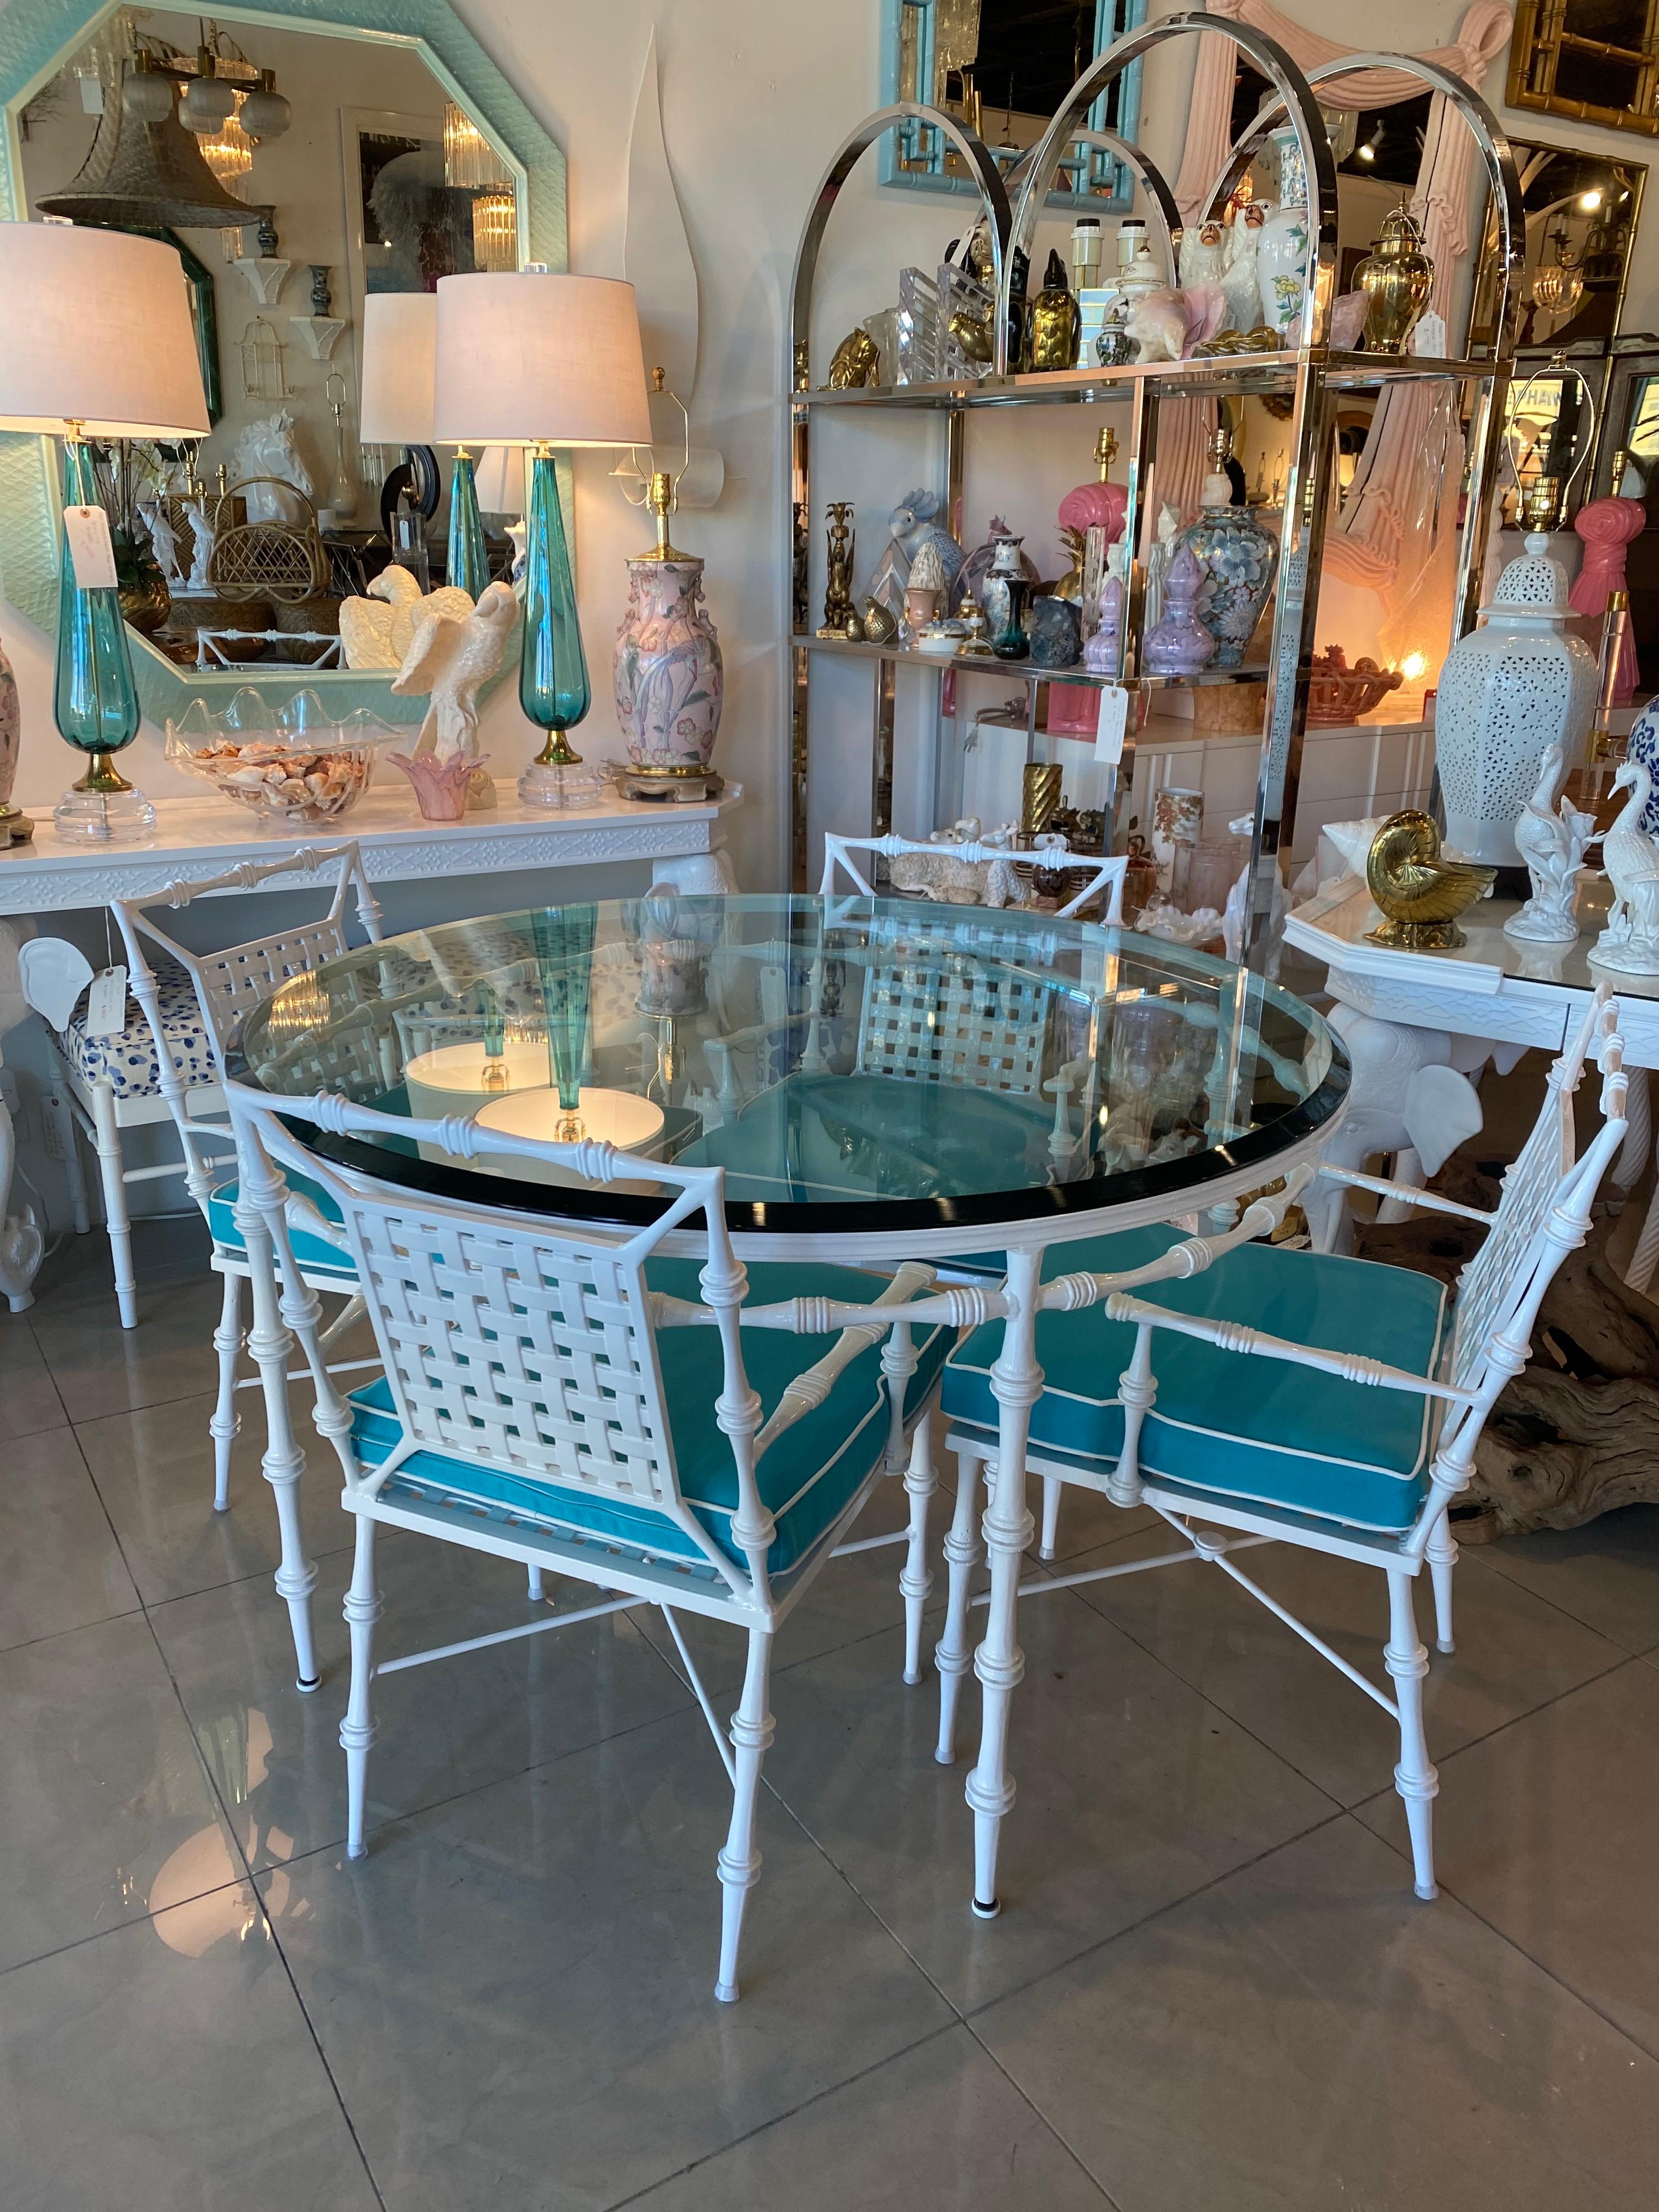 Amazing vintage Phyllis Morris patio outdoor dining set. Set
Includes dining table, glass top, and 4 armchairs with cushions.
This set has been professionally powder-coated in a high gloss white. The custom cushions are removable and are all new